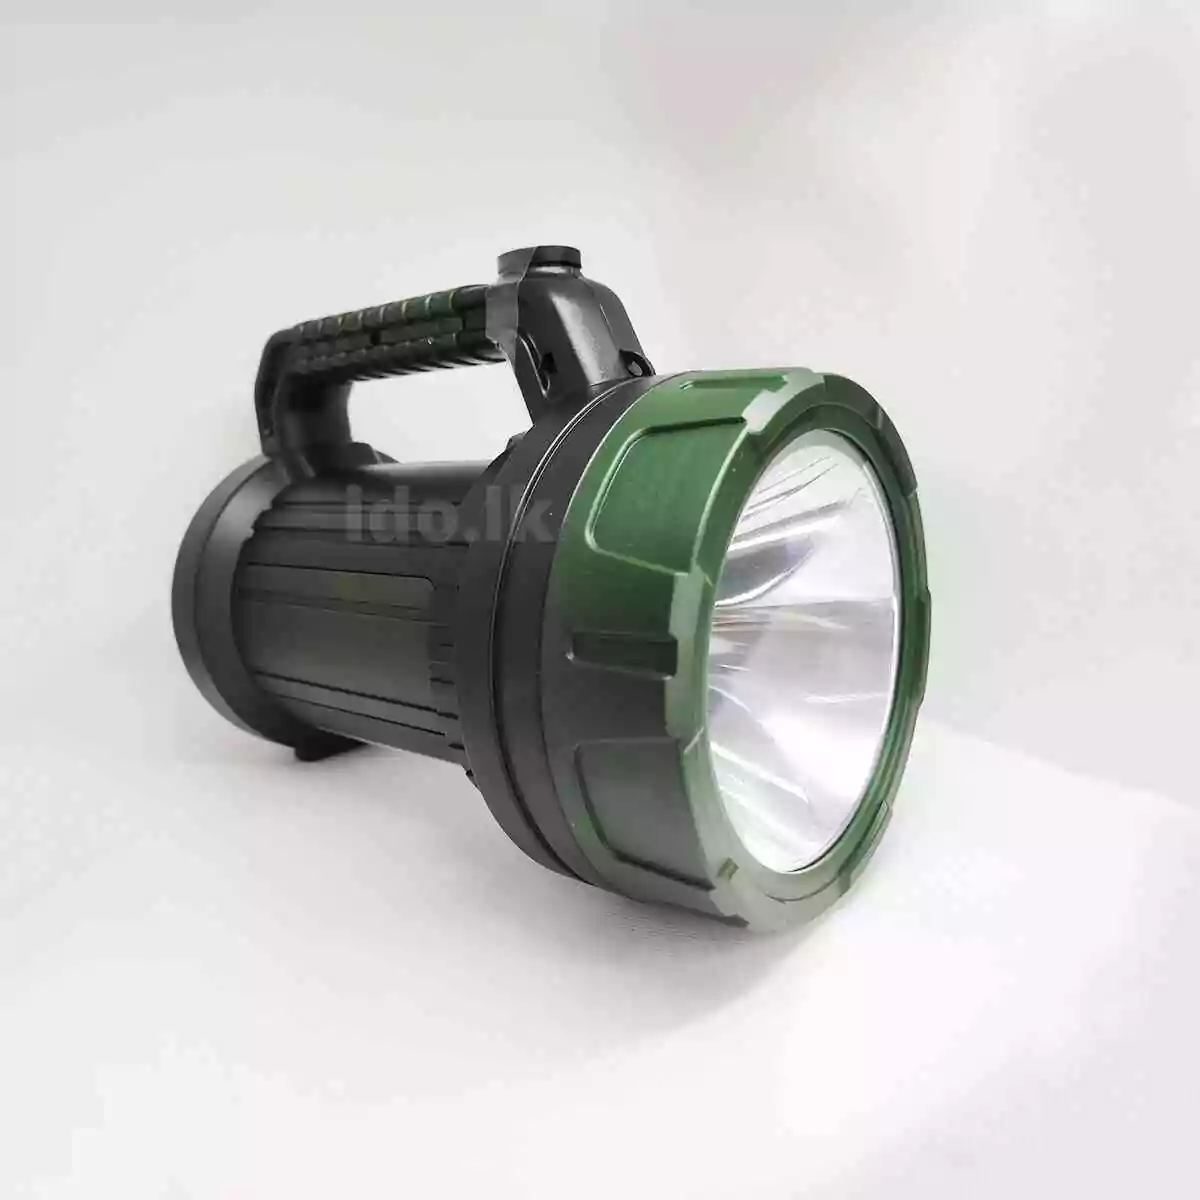 AIKO AS 717 Super Rechargeable Torch Best Price in Sri Lanka